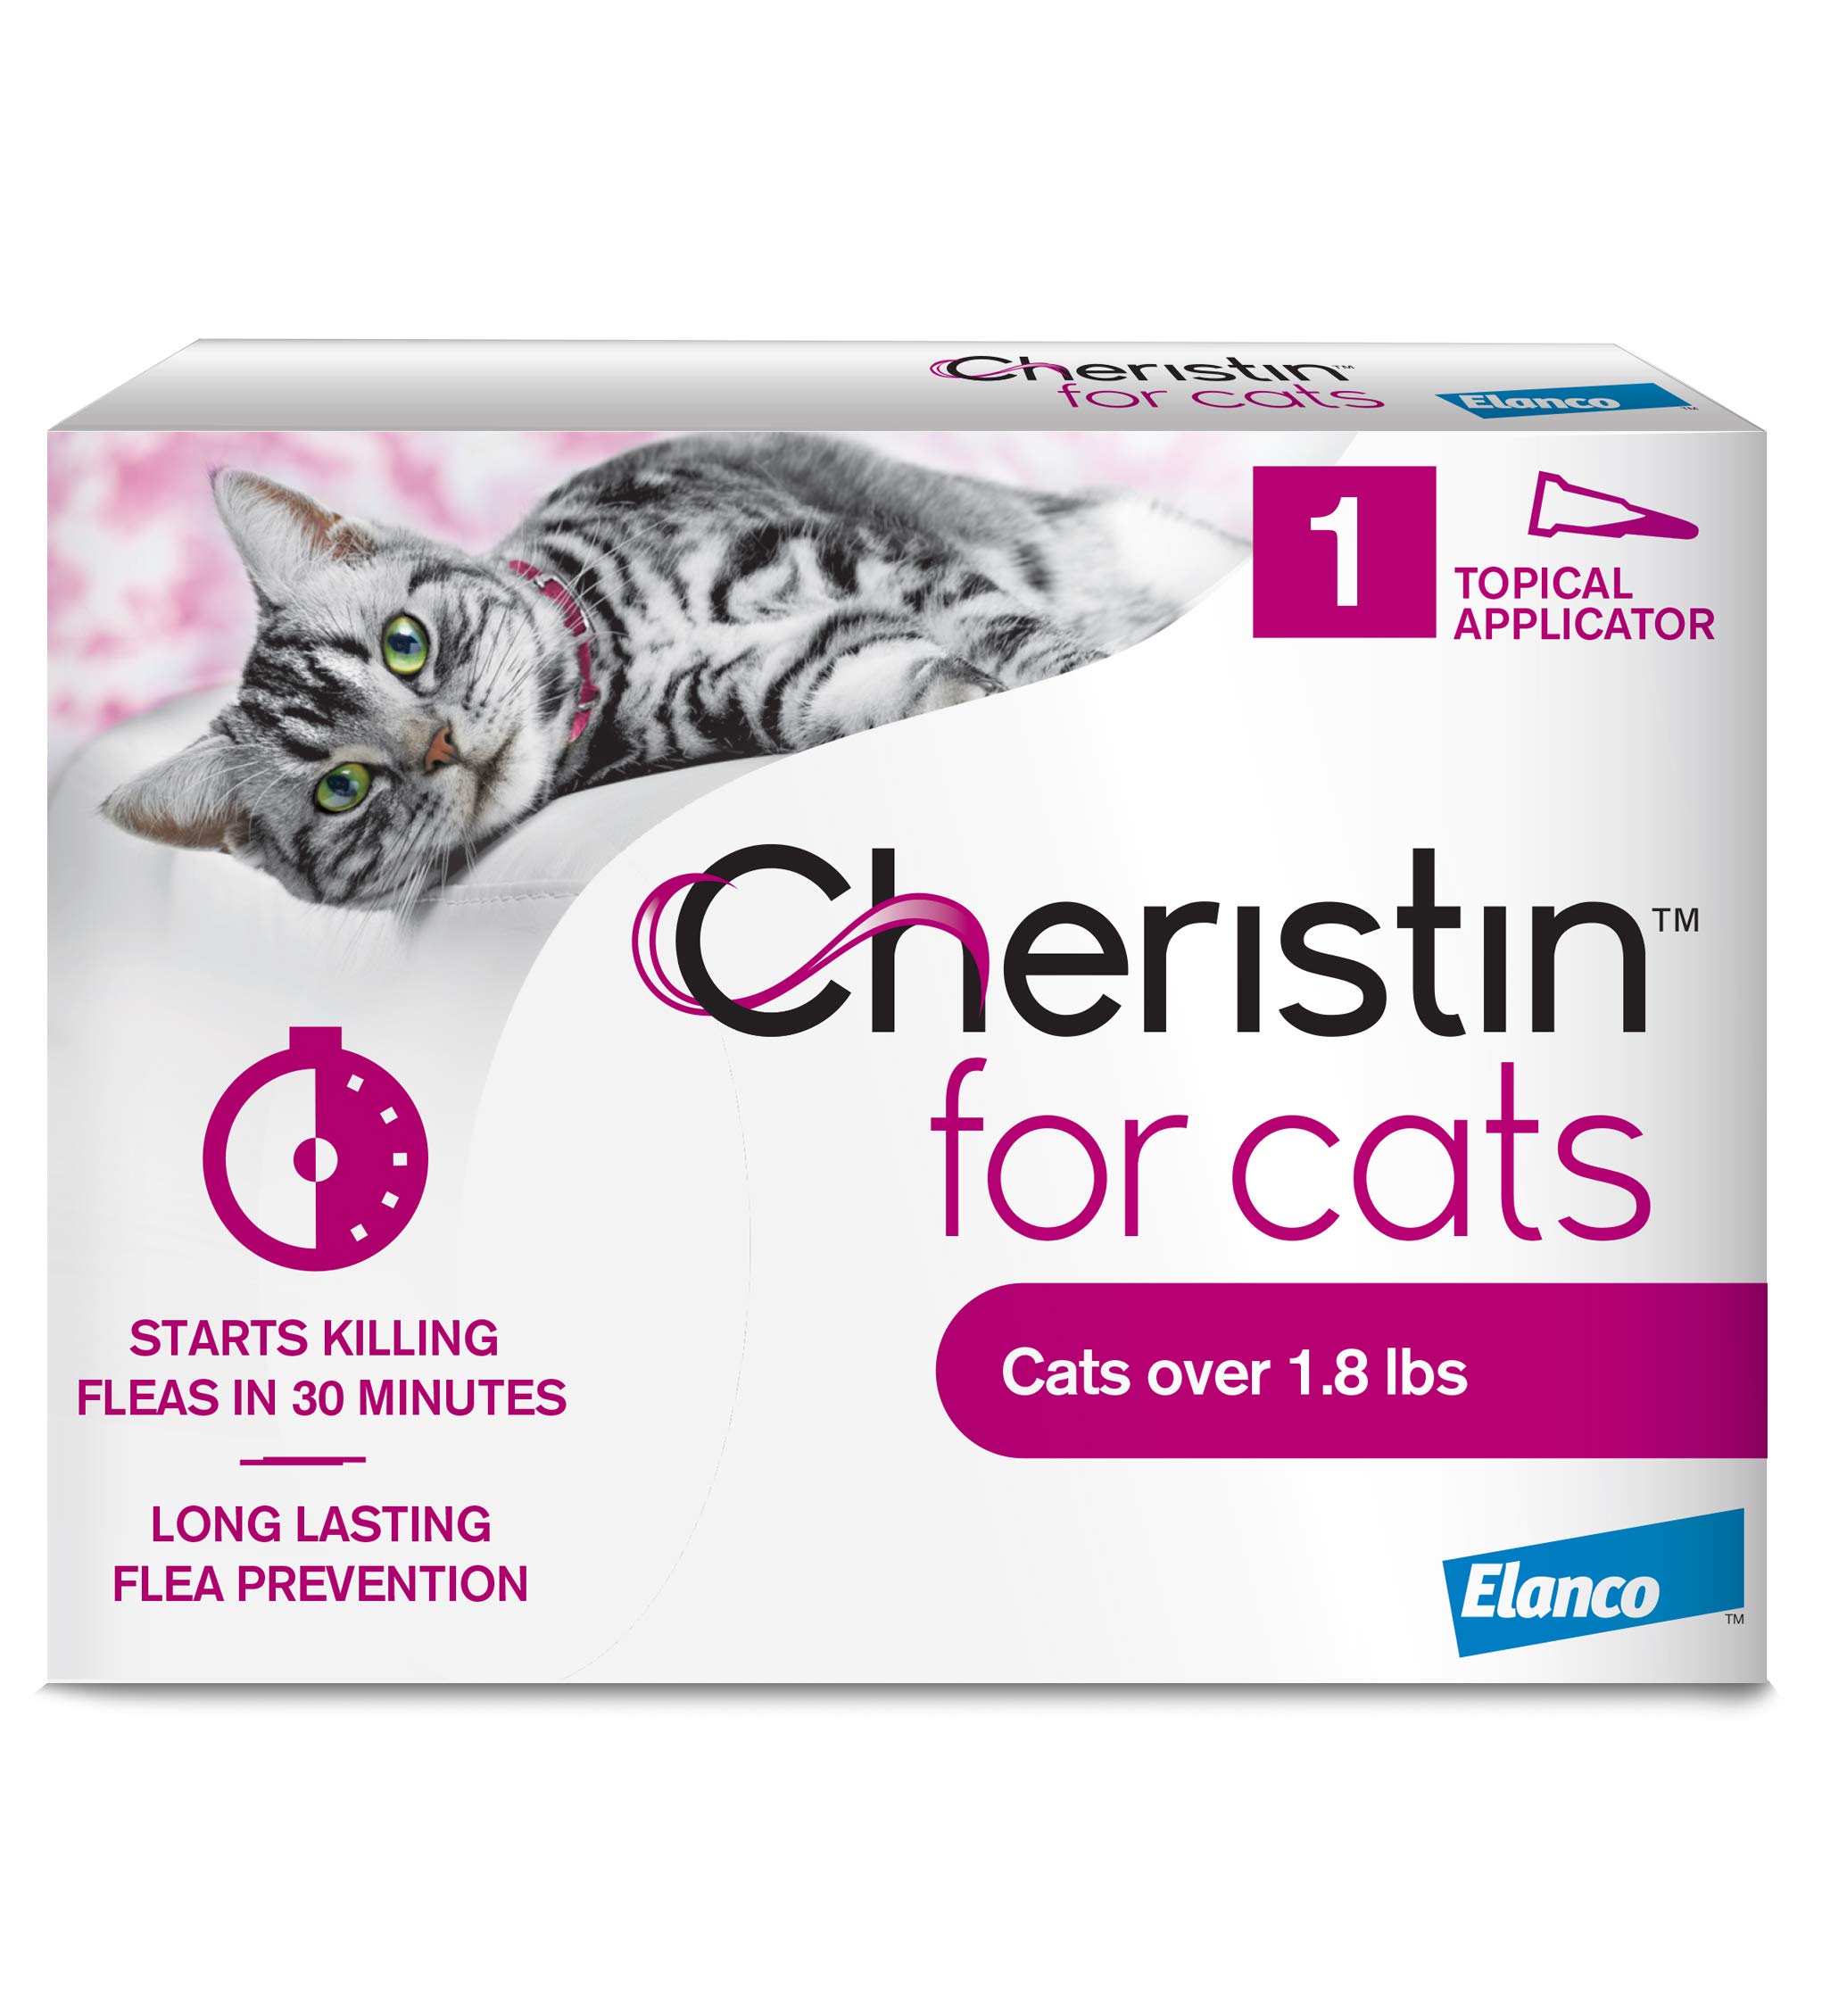 Cheristin for Cats Topical Flea Treatment – Effective Through 6 Weeks